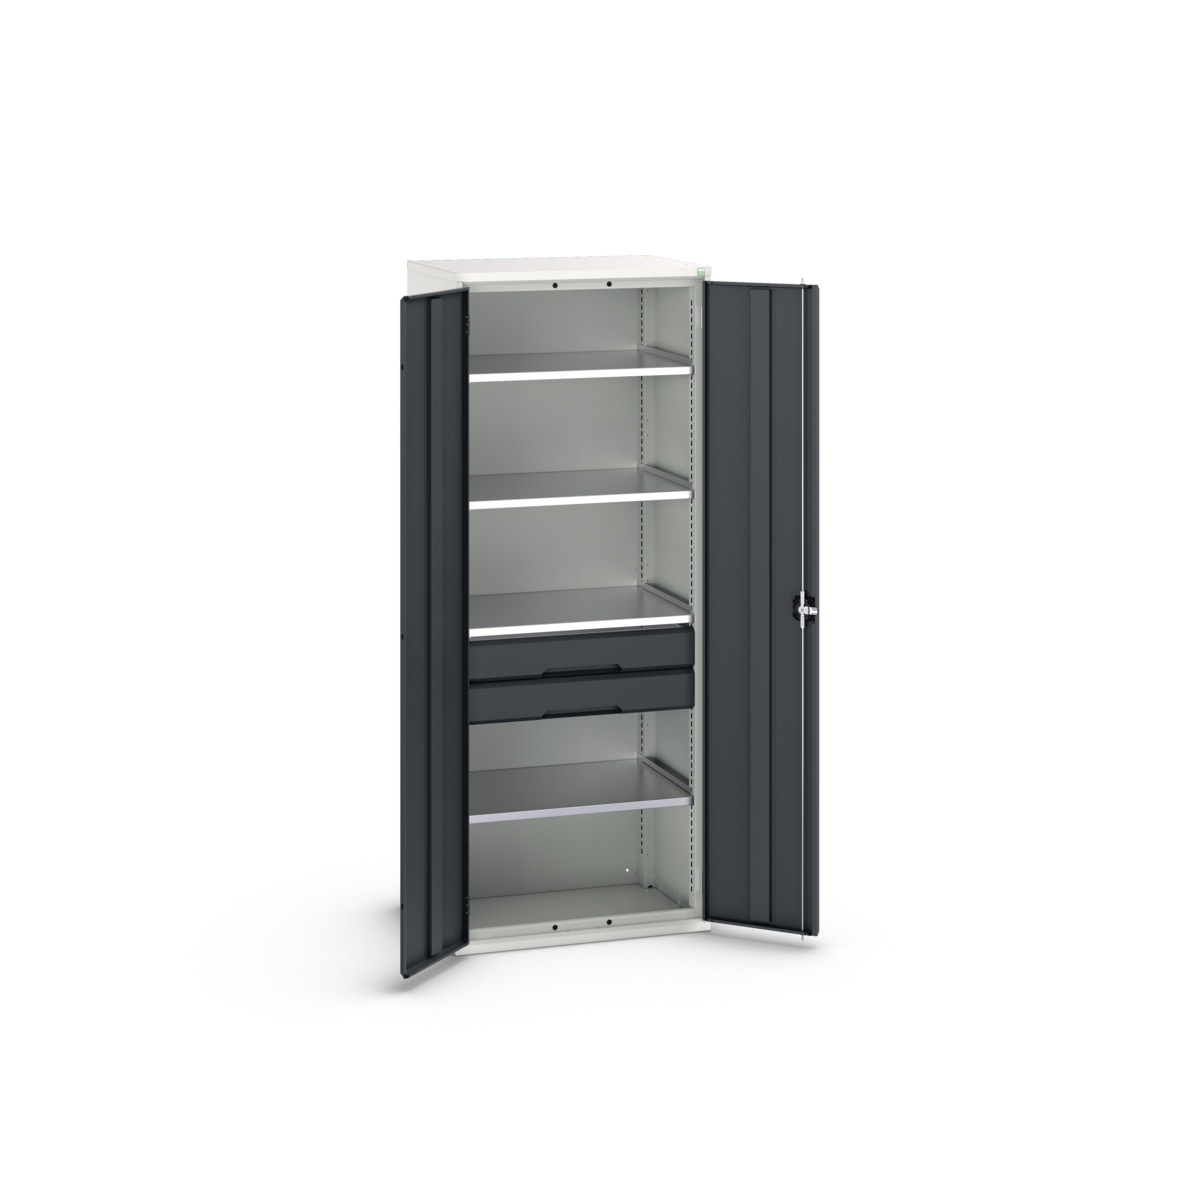 16926455.19 - verso kitted cupboard